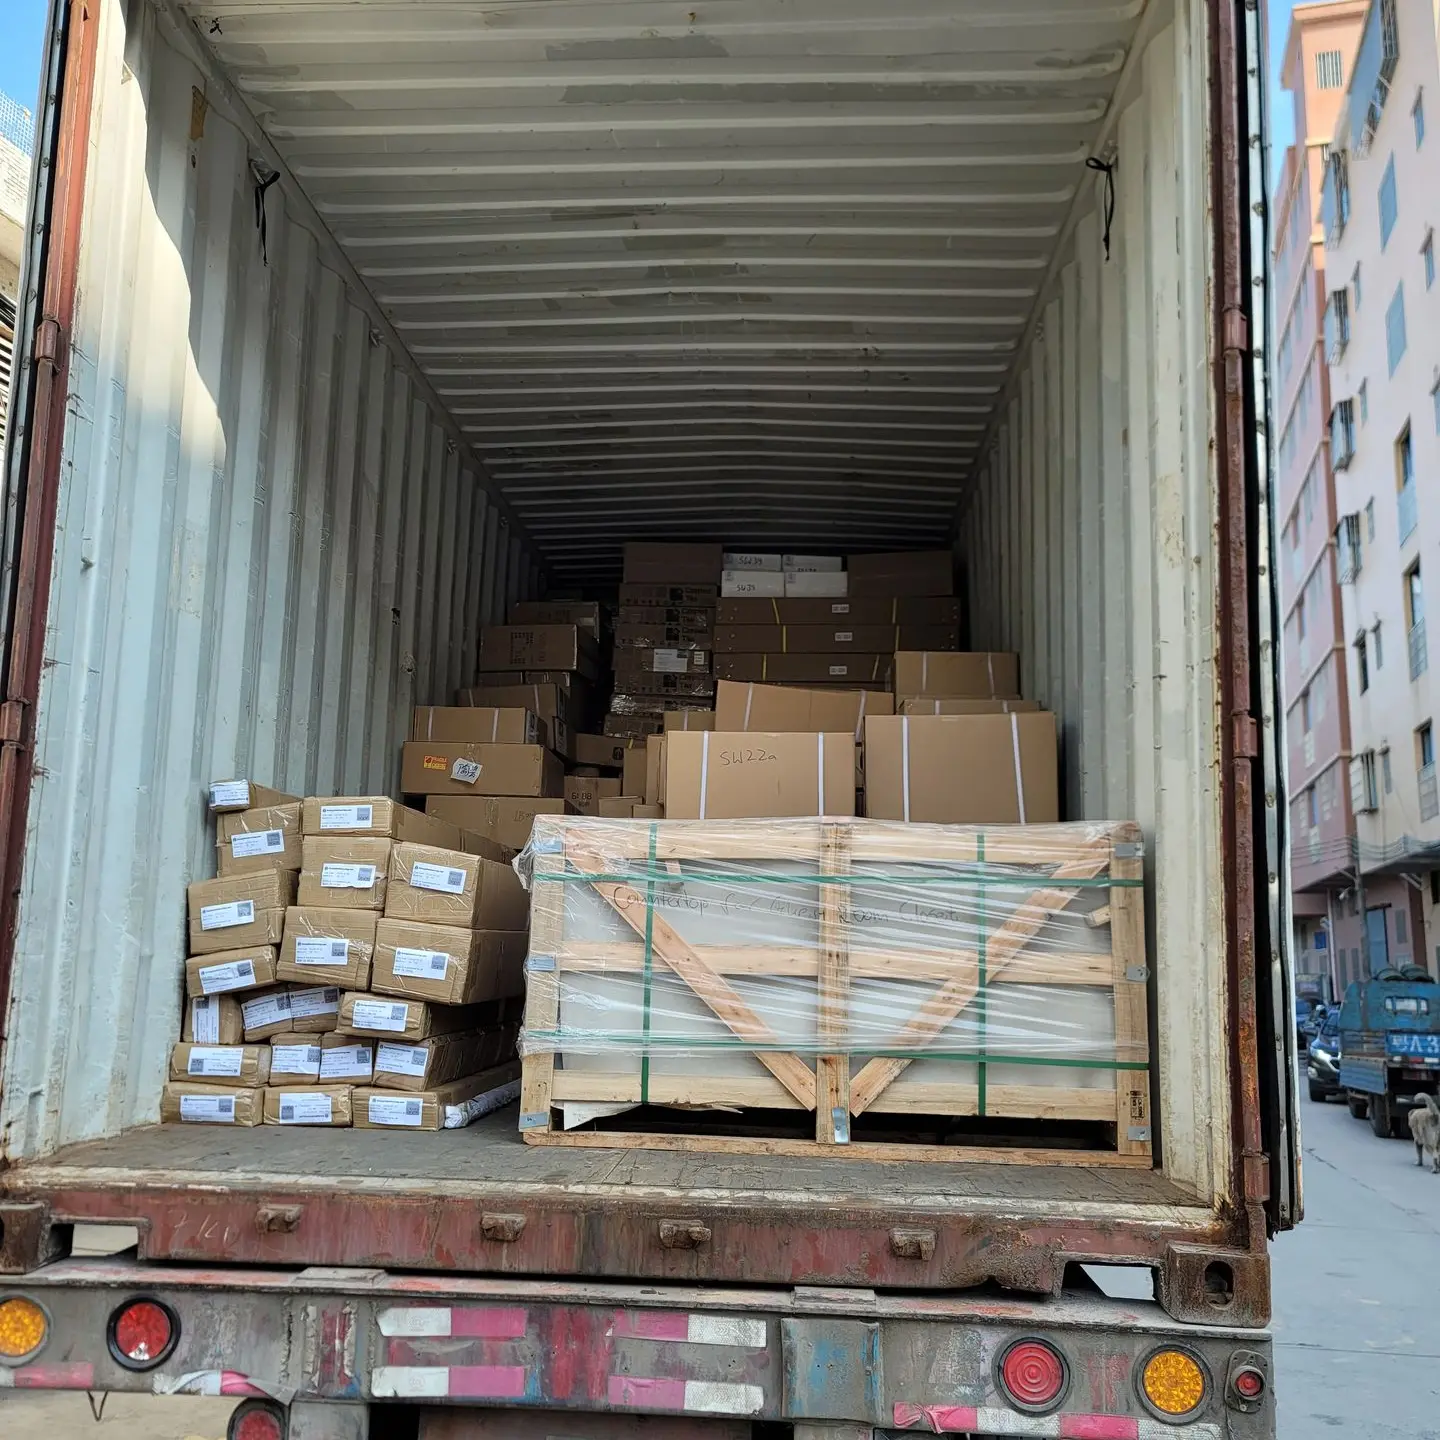  An image of a truck loaded with boxes and miscellaneous items.